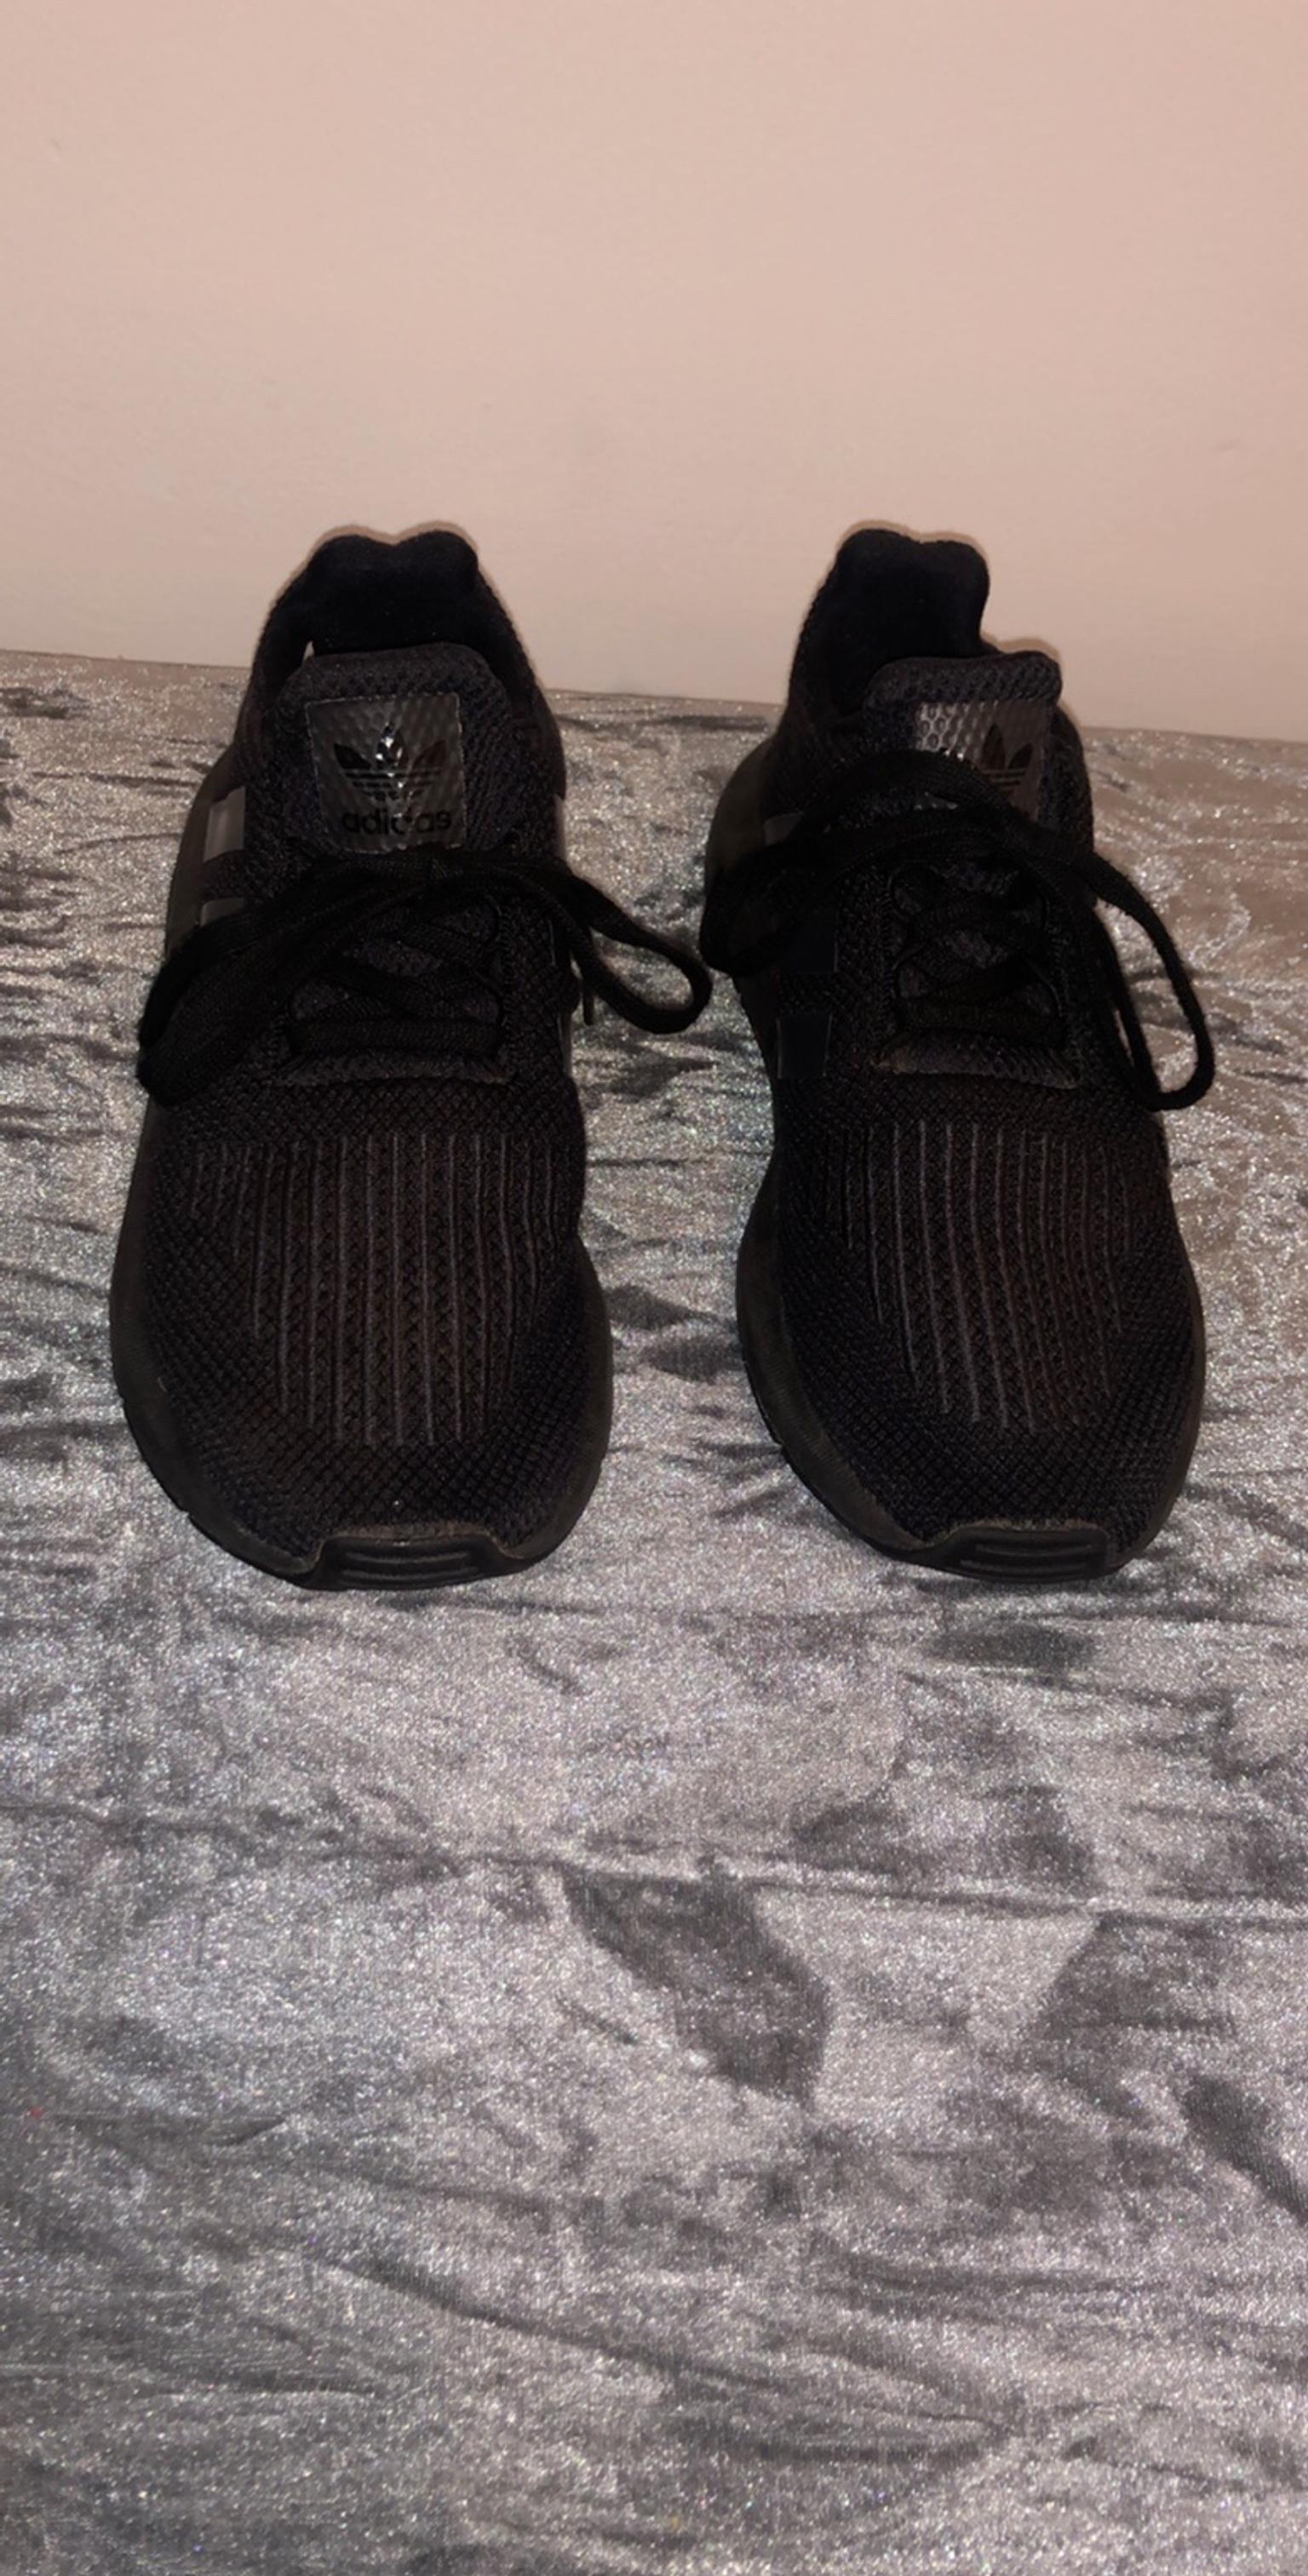 black adidas trainers size 2